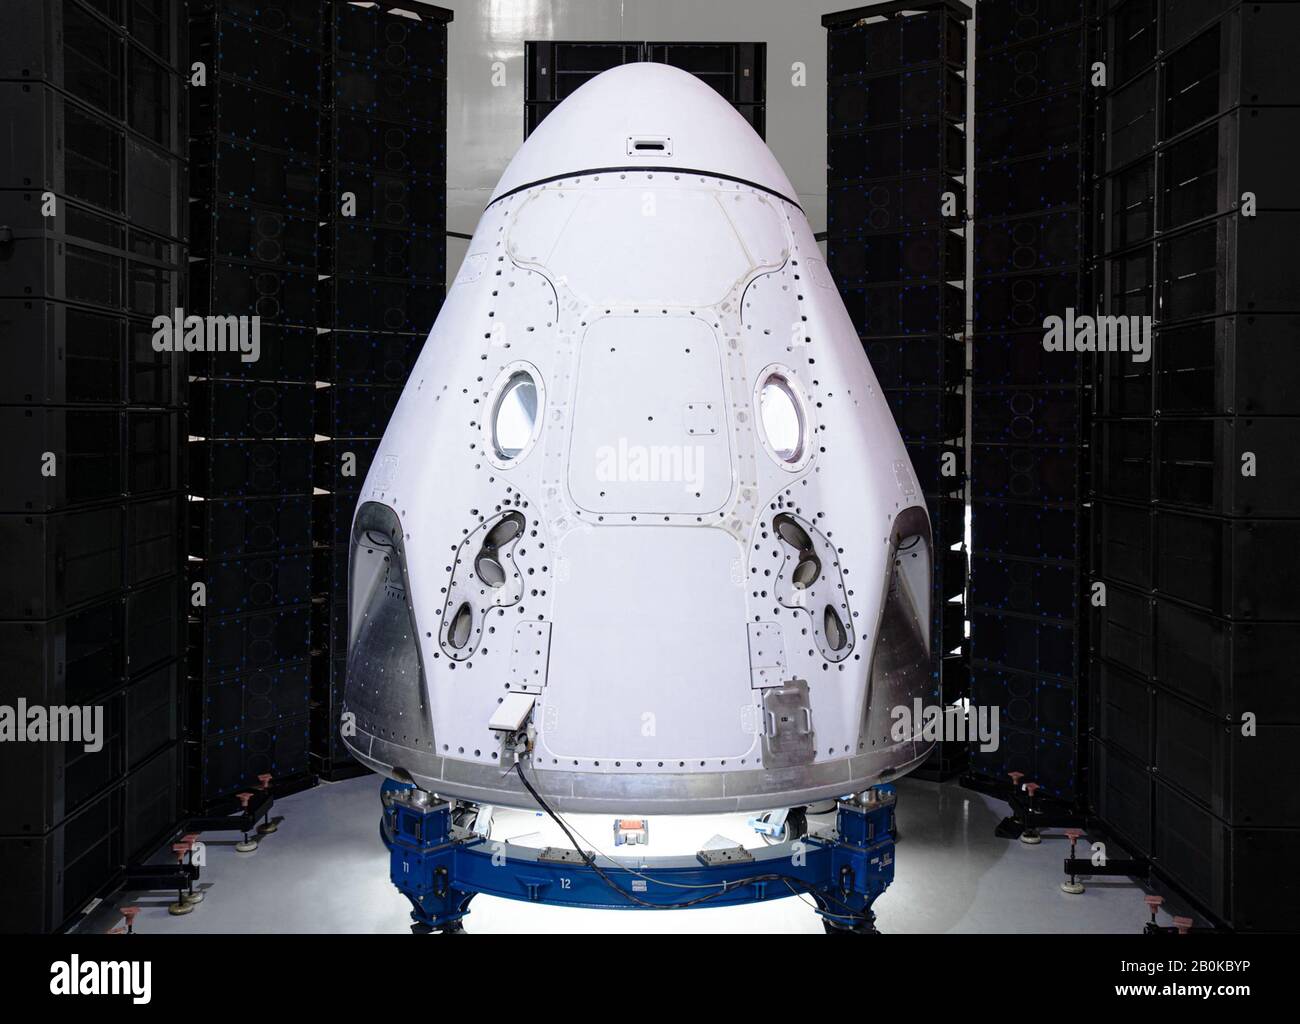 Kennedy Space Center, United States. 20th Feb, 2020. SpaceX's Crew Dragon capsule completes acoustic testing in Florida ahead of its crewed flight to and from the International Space Station later this year. Officially known as SpaceX Demo-2, NASA astronauts Bob Behnken and Doug Hurley will launch aboard the first crewed test flight of the Crew Dragon spacecraft, in what is the first crewed spaceflight launched from U.S. soil since STS-135 in 2011. Photo by SpaceX/UPI Credit: UPI/Alamy Live News Stock Photo